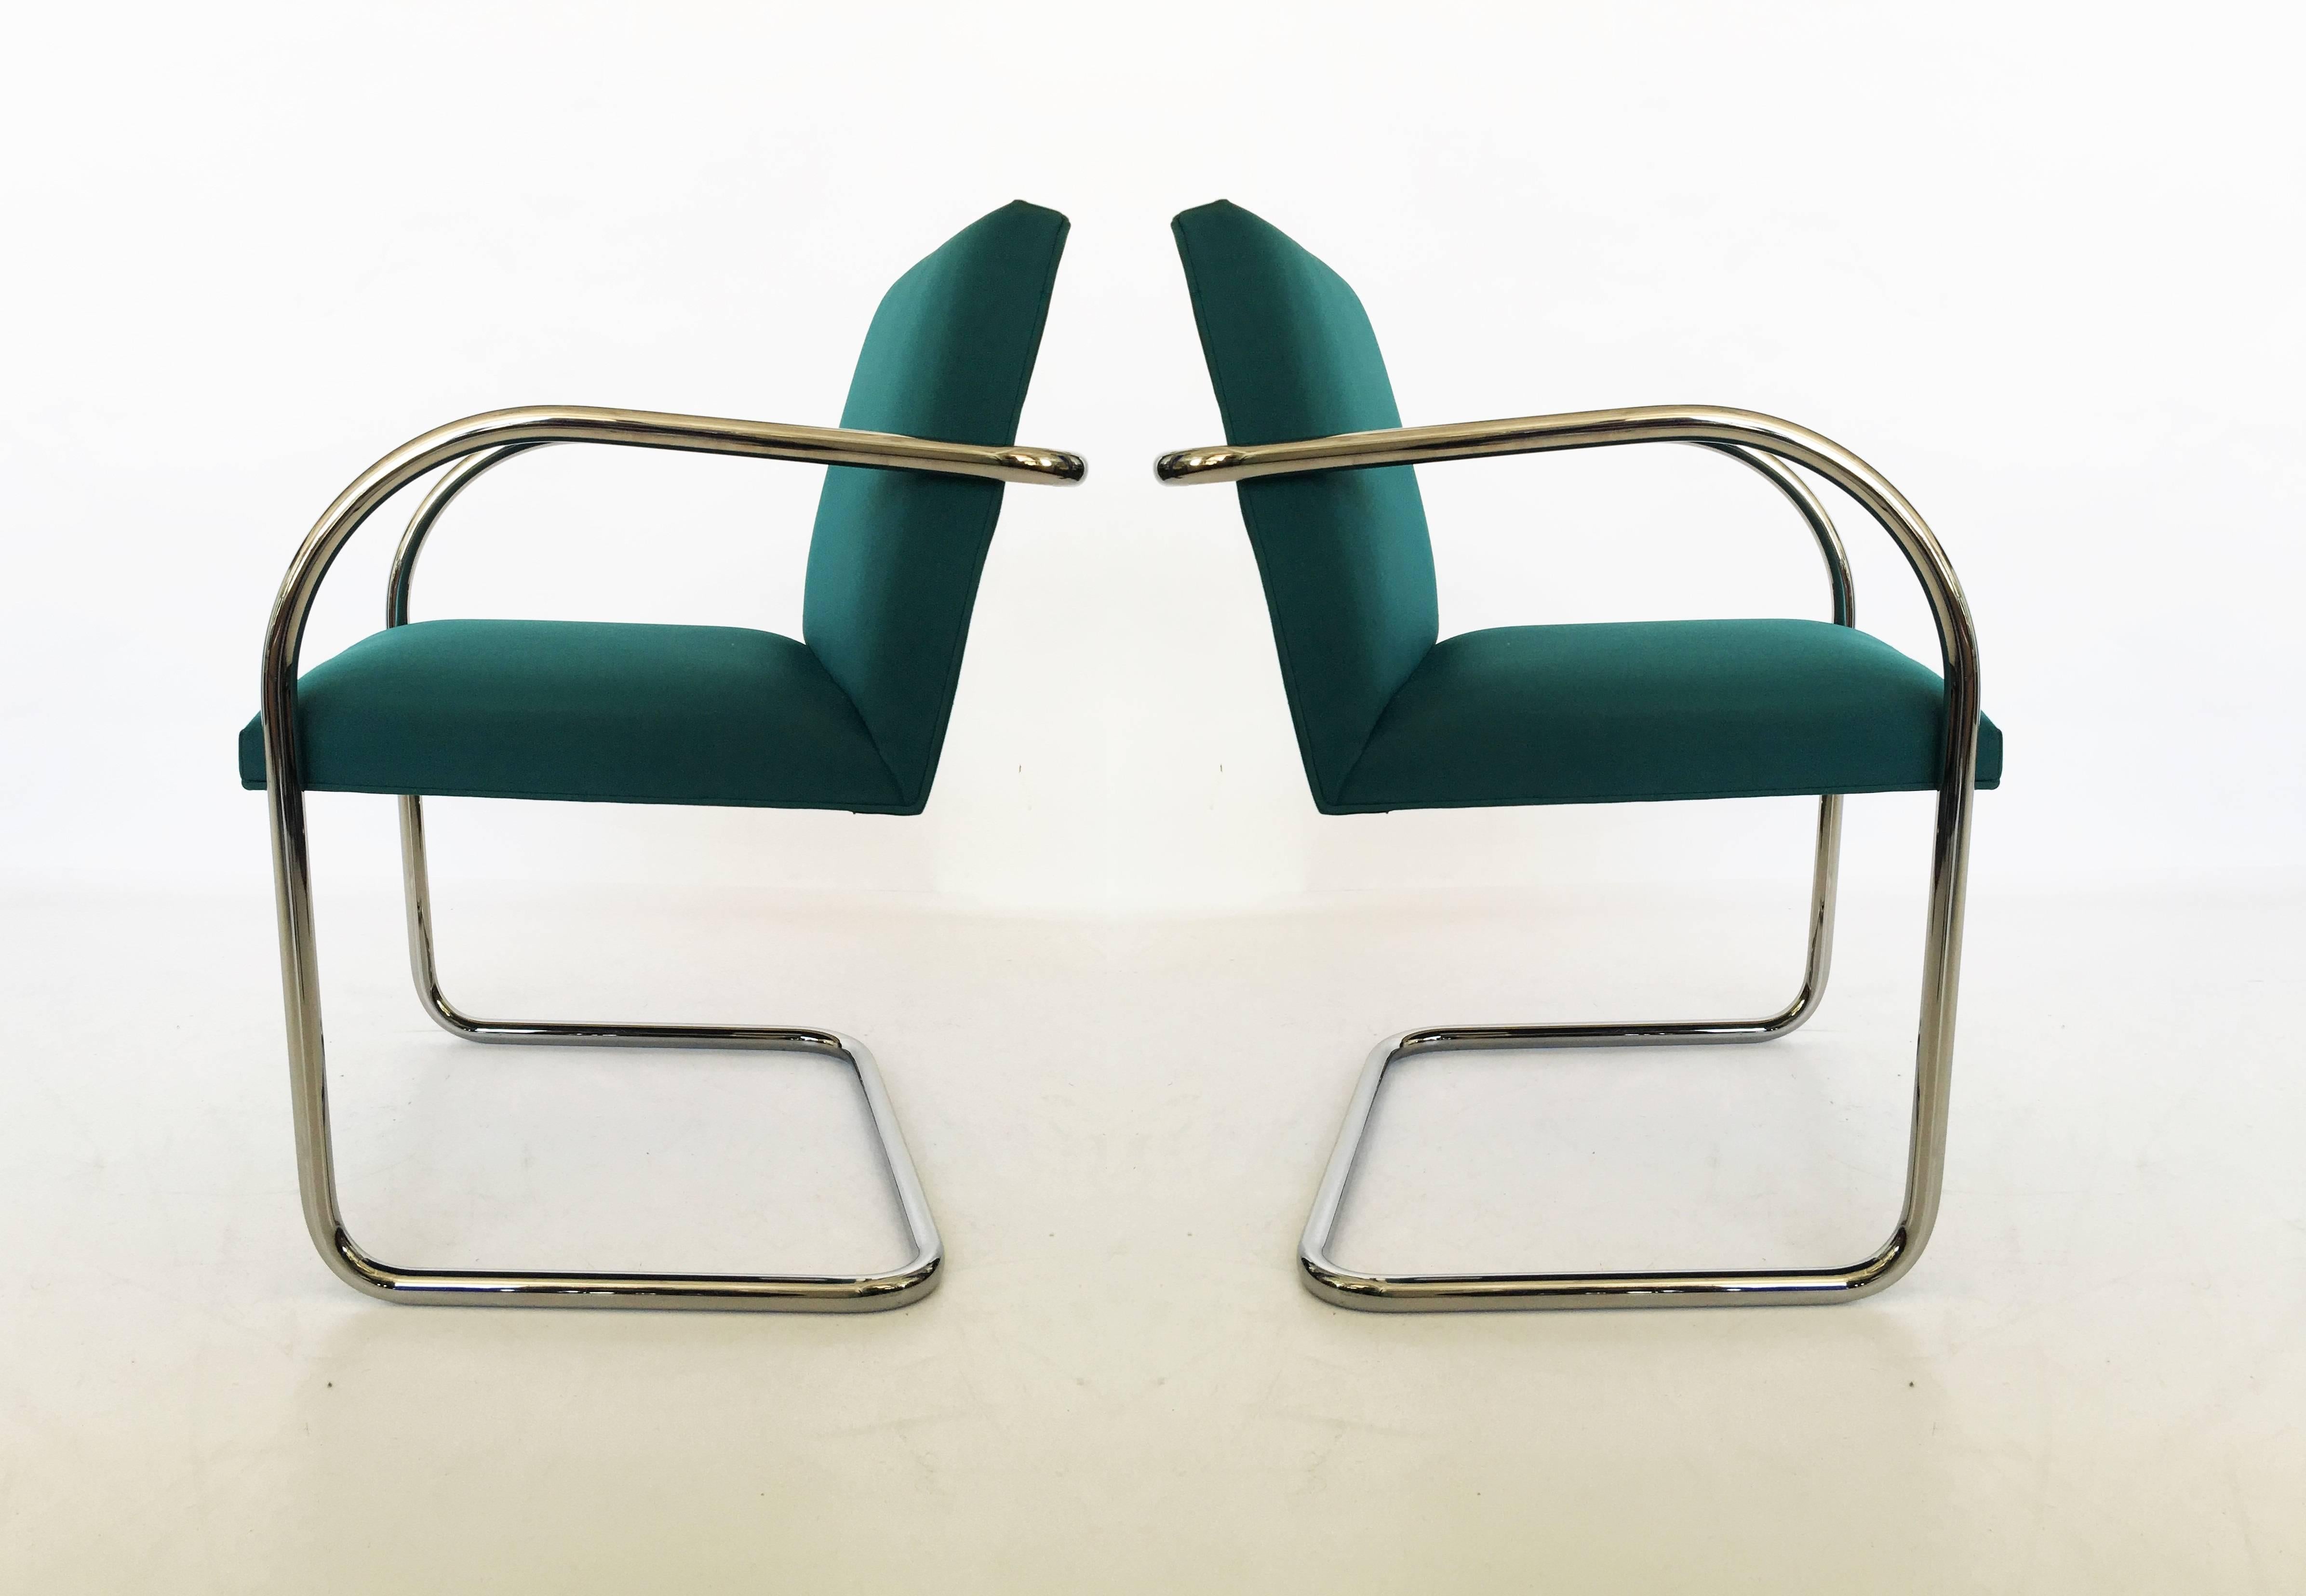 A great set of ten tubular Brno chairs by Mies van der Rohe for Knoll. Chrome is in great condition. Upholstery can be used as is or re-upholstered.